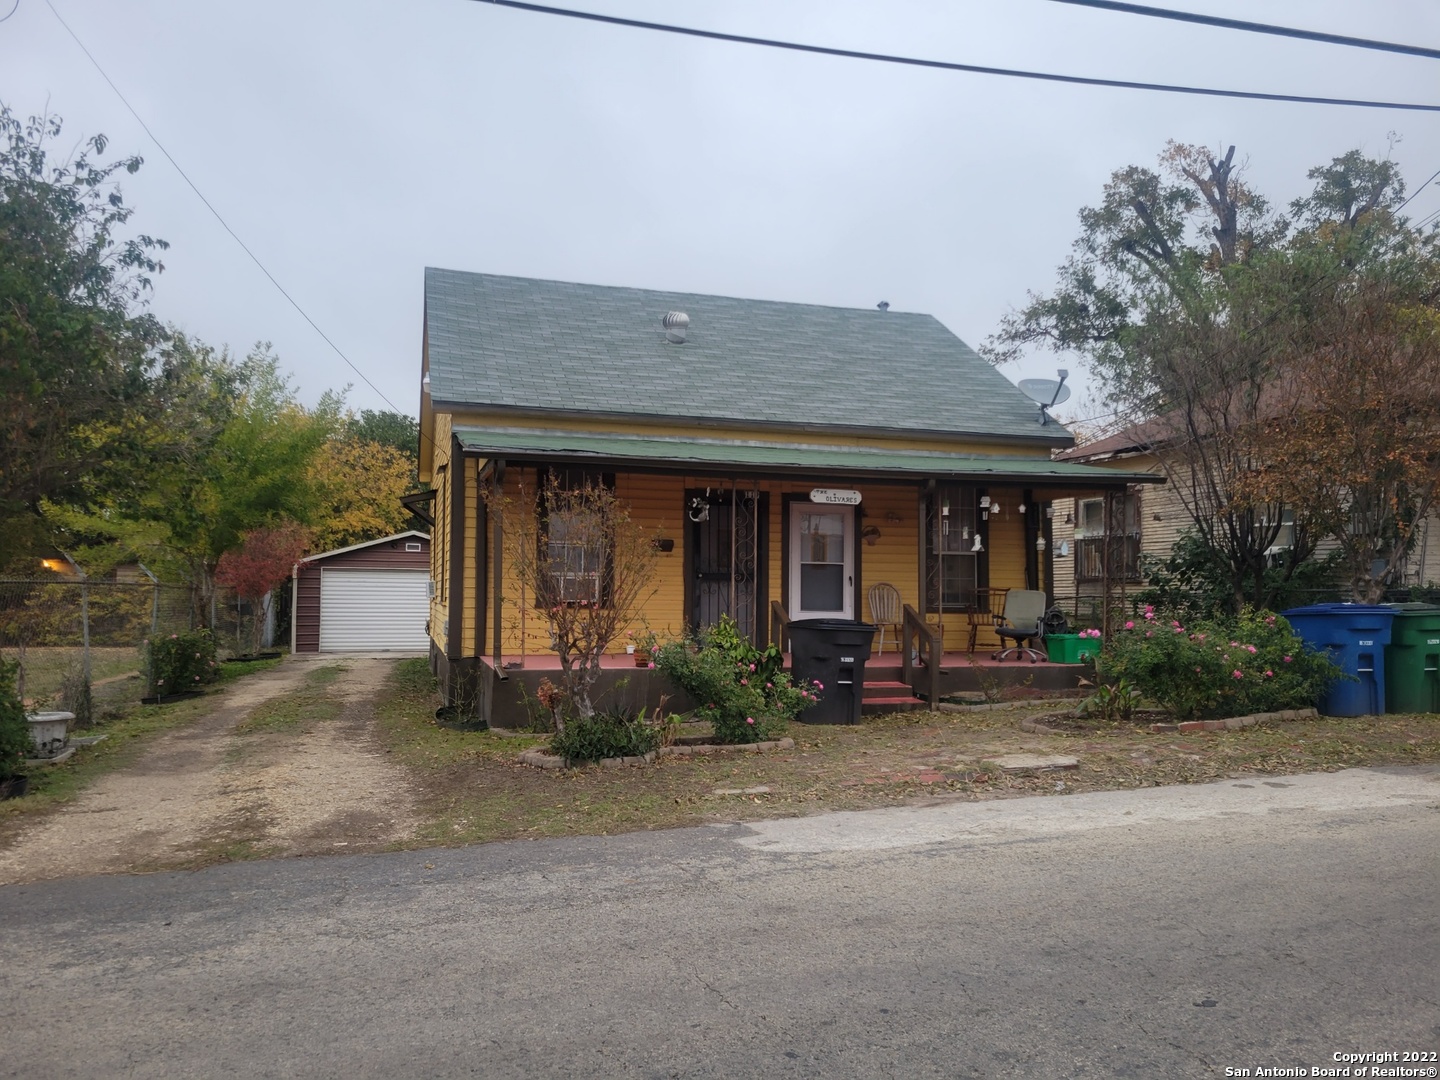 Cozy 2 bedroom, 1 bath home! Near Downtown San Antonio.   Hardwood floors, concrete front porch. One car+ metal garage built on a slab.   Easy access to most expressways. Nice sized fenced yard!